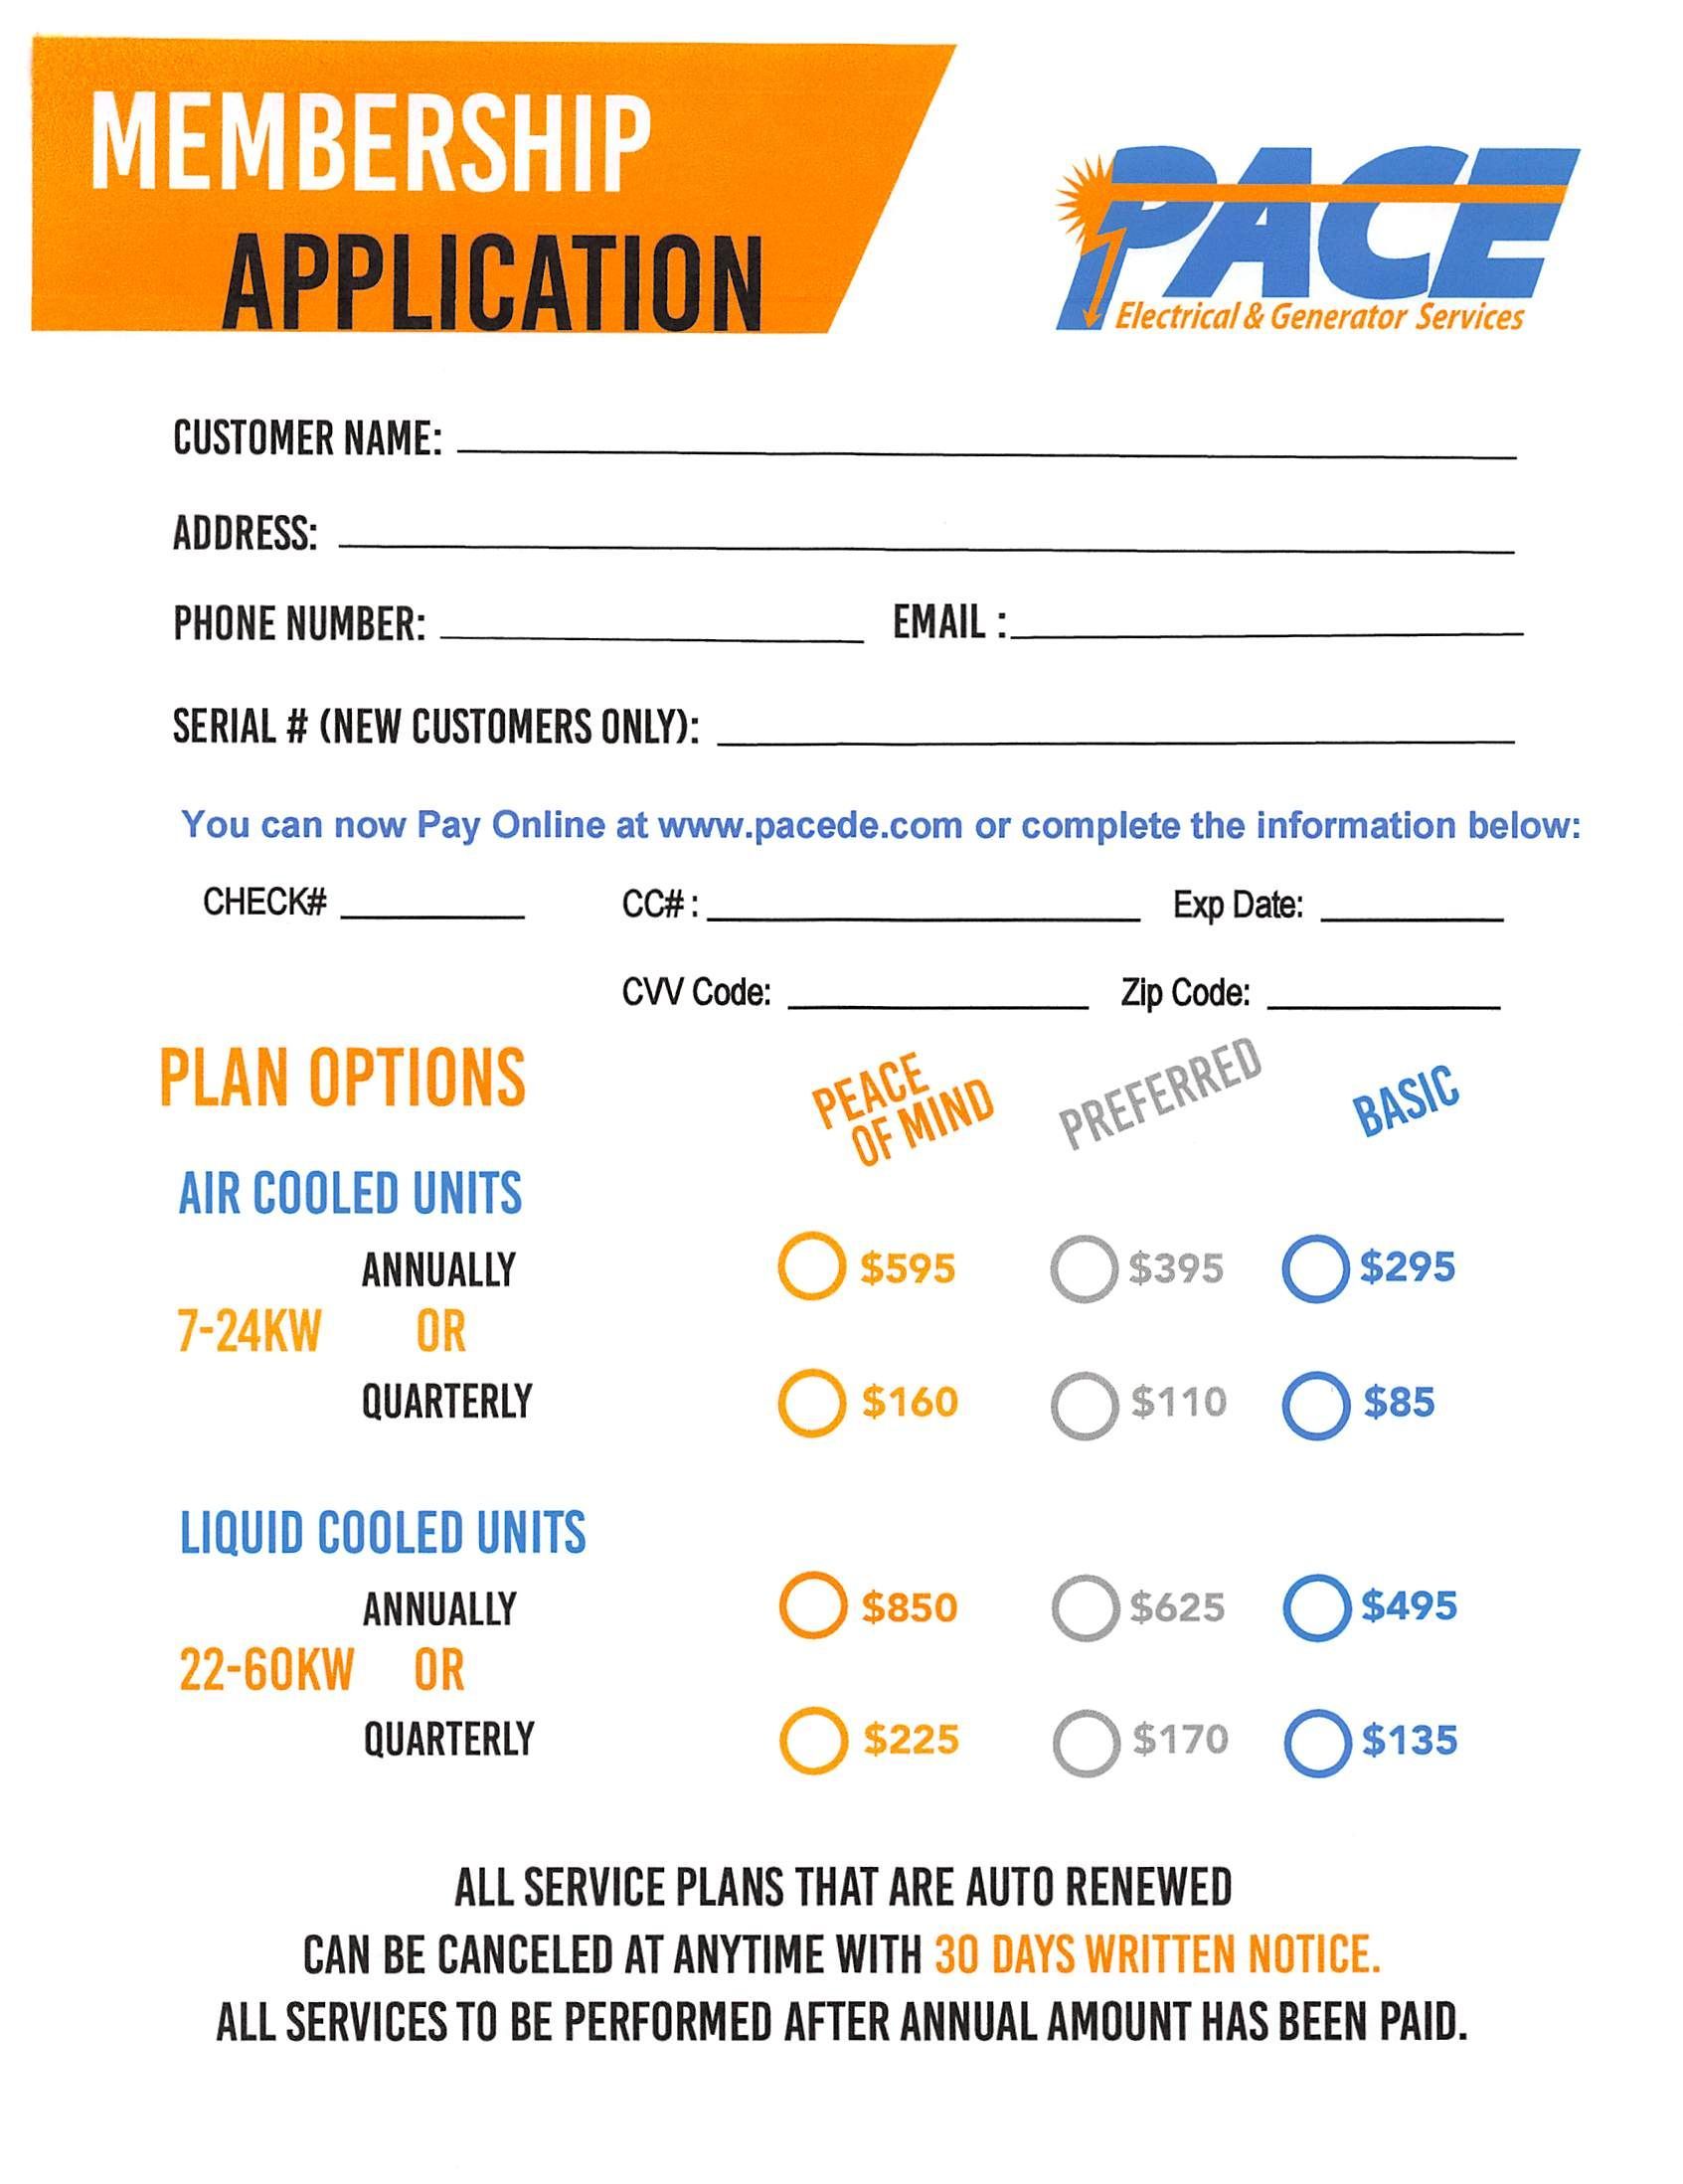 Membership Applicaton Pace Electrical & Generator Services  